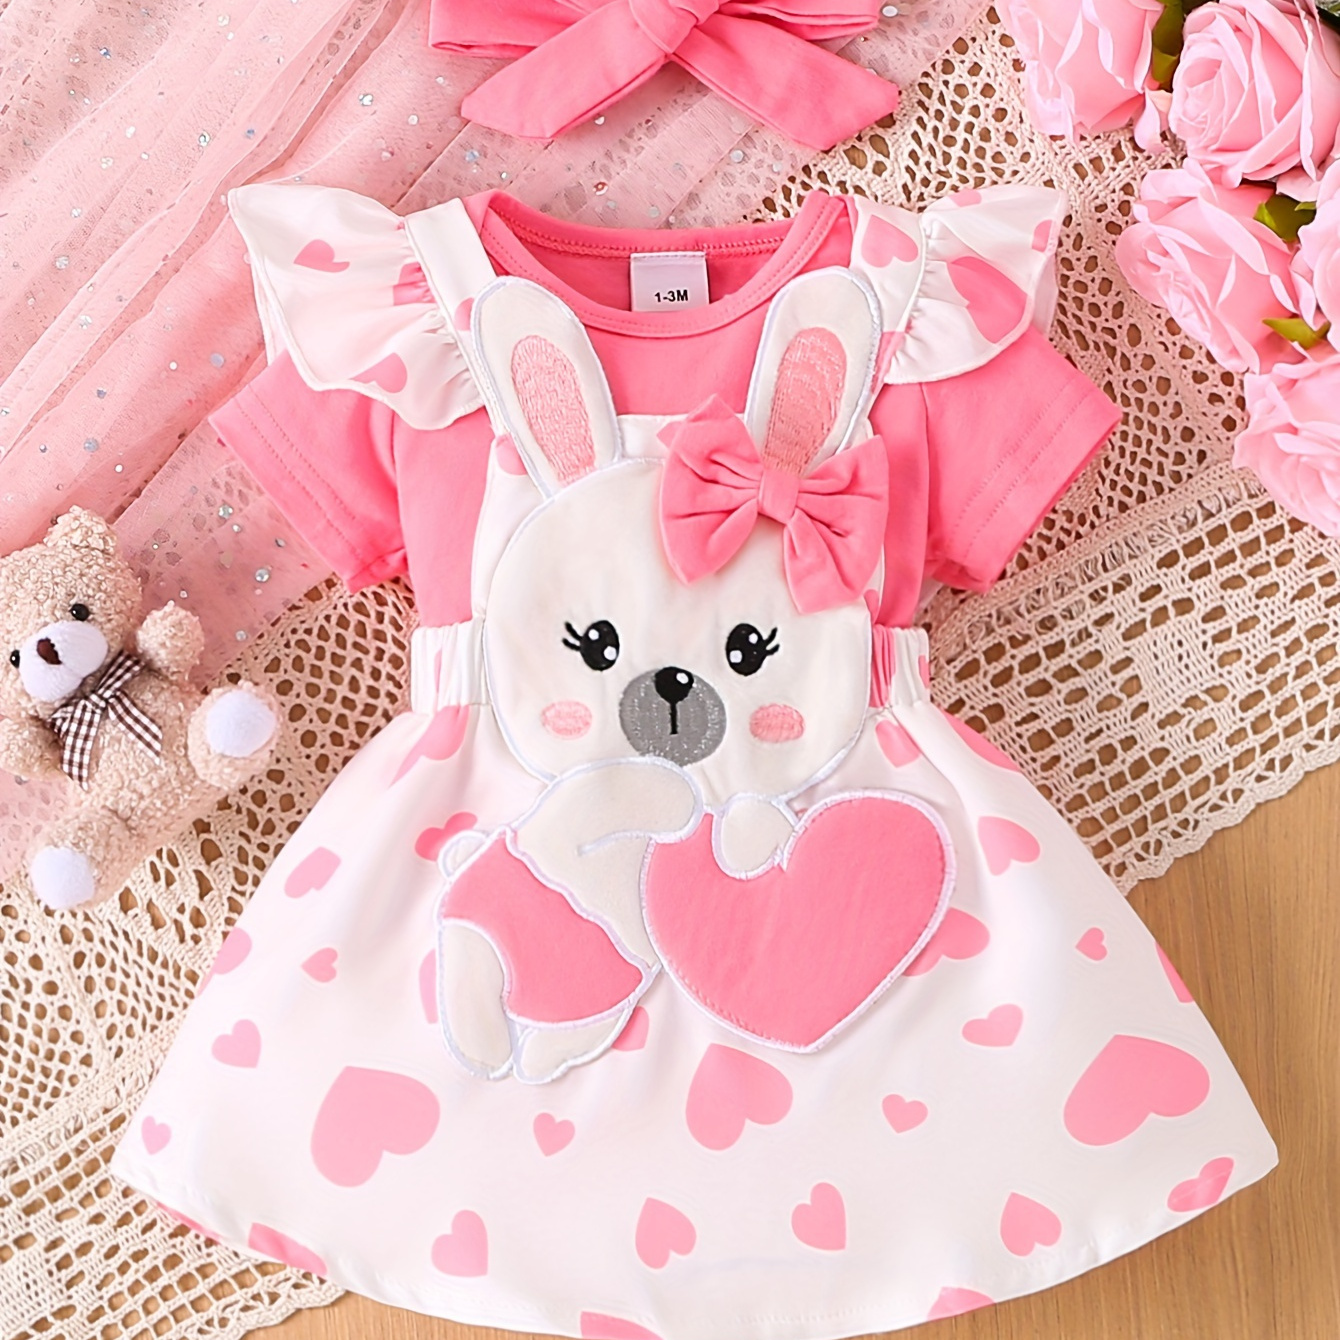 

Baby's Cute Rabbit Embroidered 2pcs Lovely Summer Outfit, Bodysuit & Heart Pattern Suspender Overall Dress Set, Toddler & Infant Girl's Clothes For Daily/holiday/party